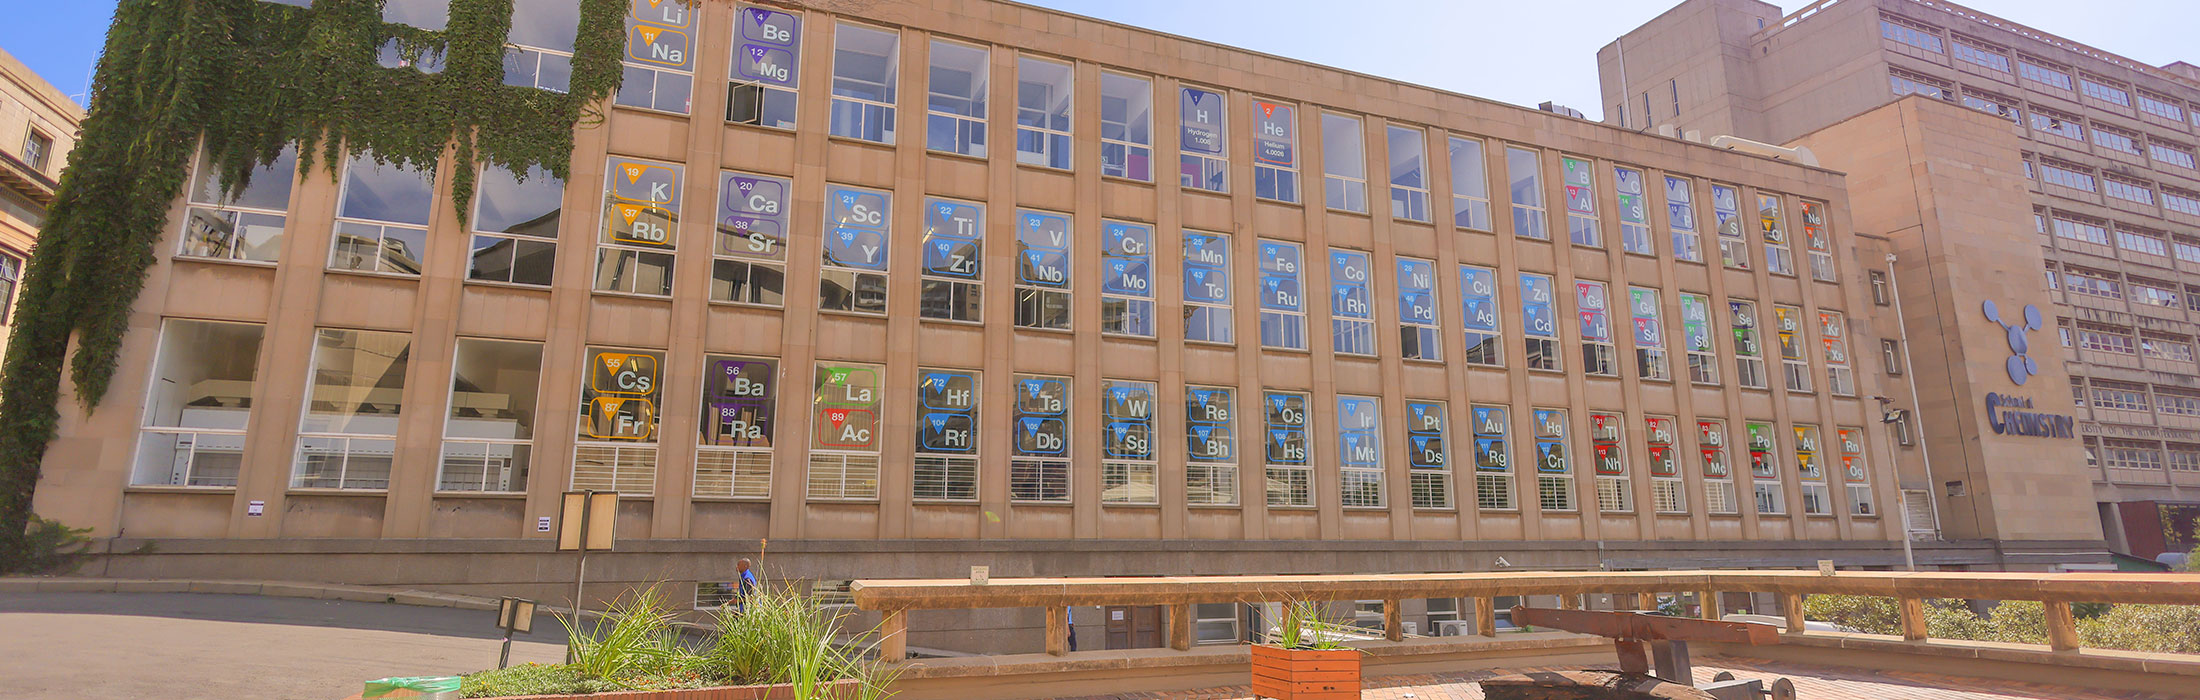 Windows showing periodic table Chemistry building